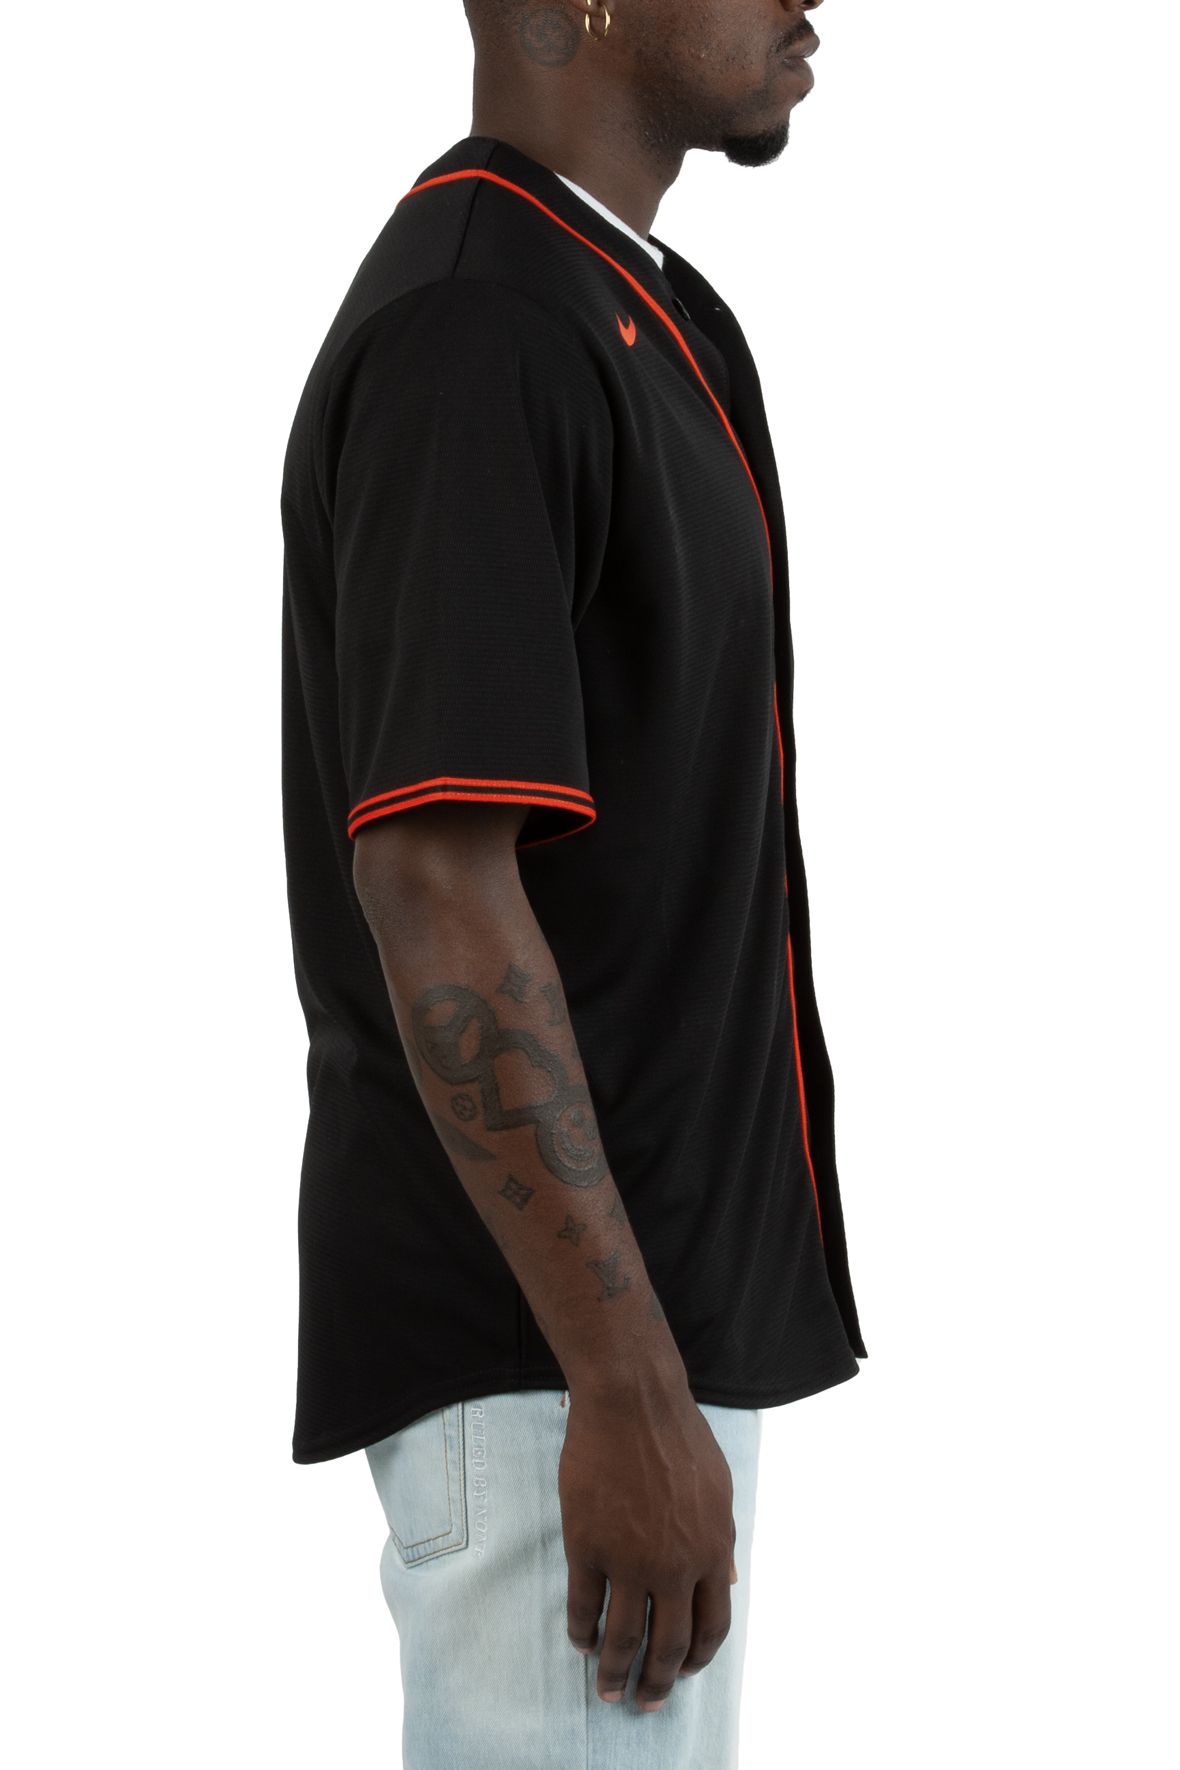 Nike City Connect Edition San Francisco Giants Jersey XL T770-GICC